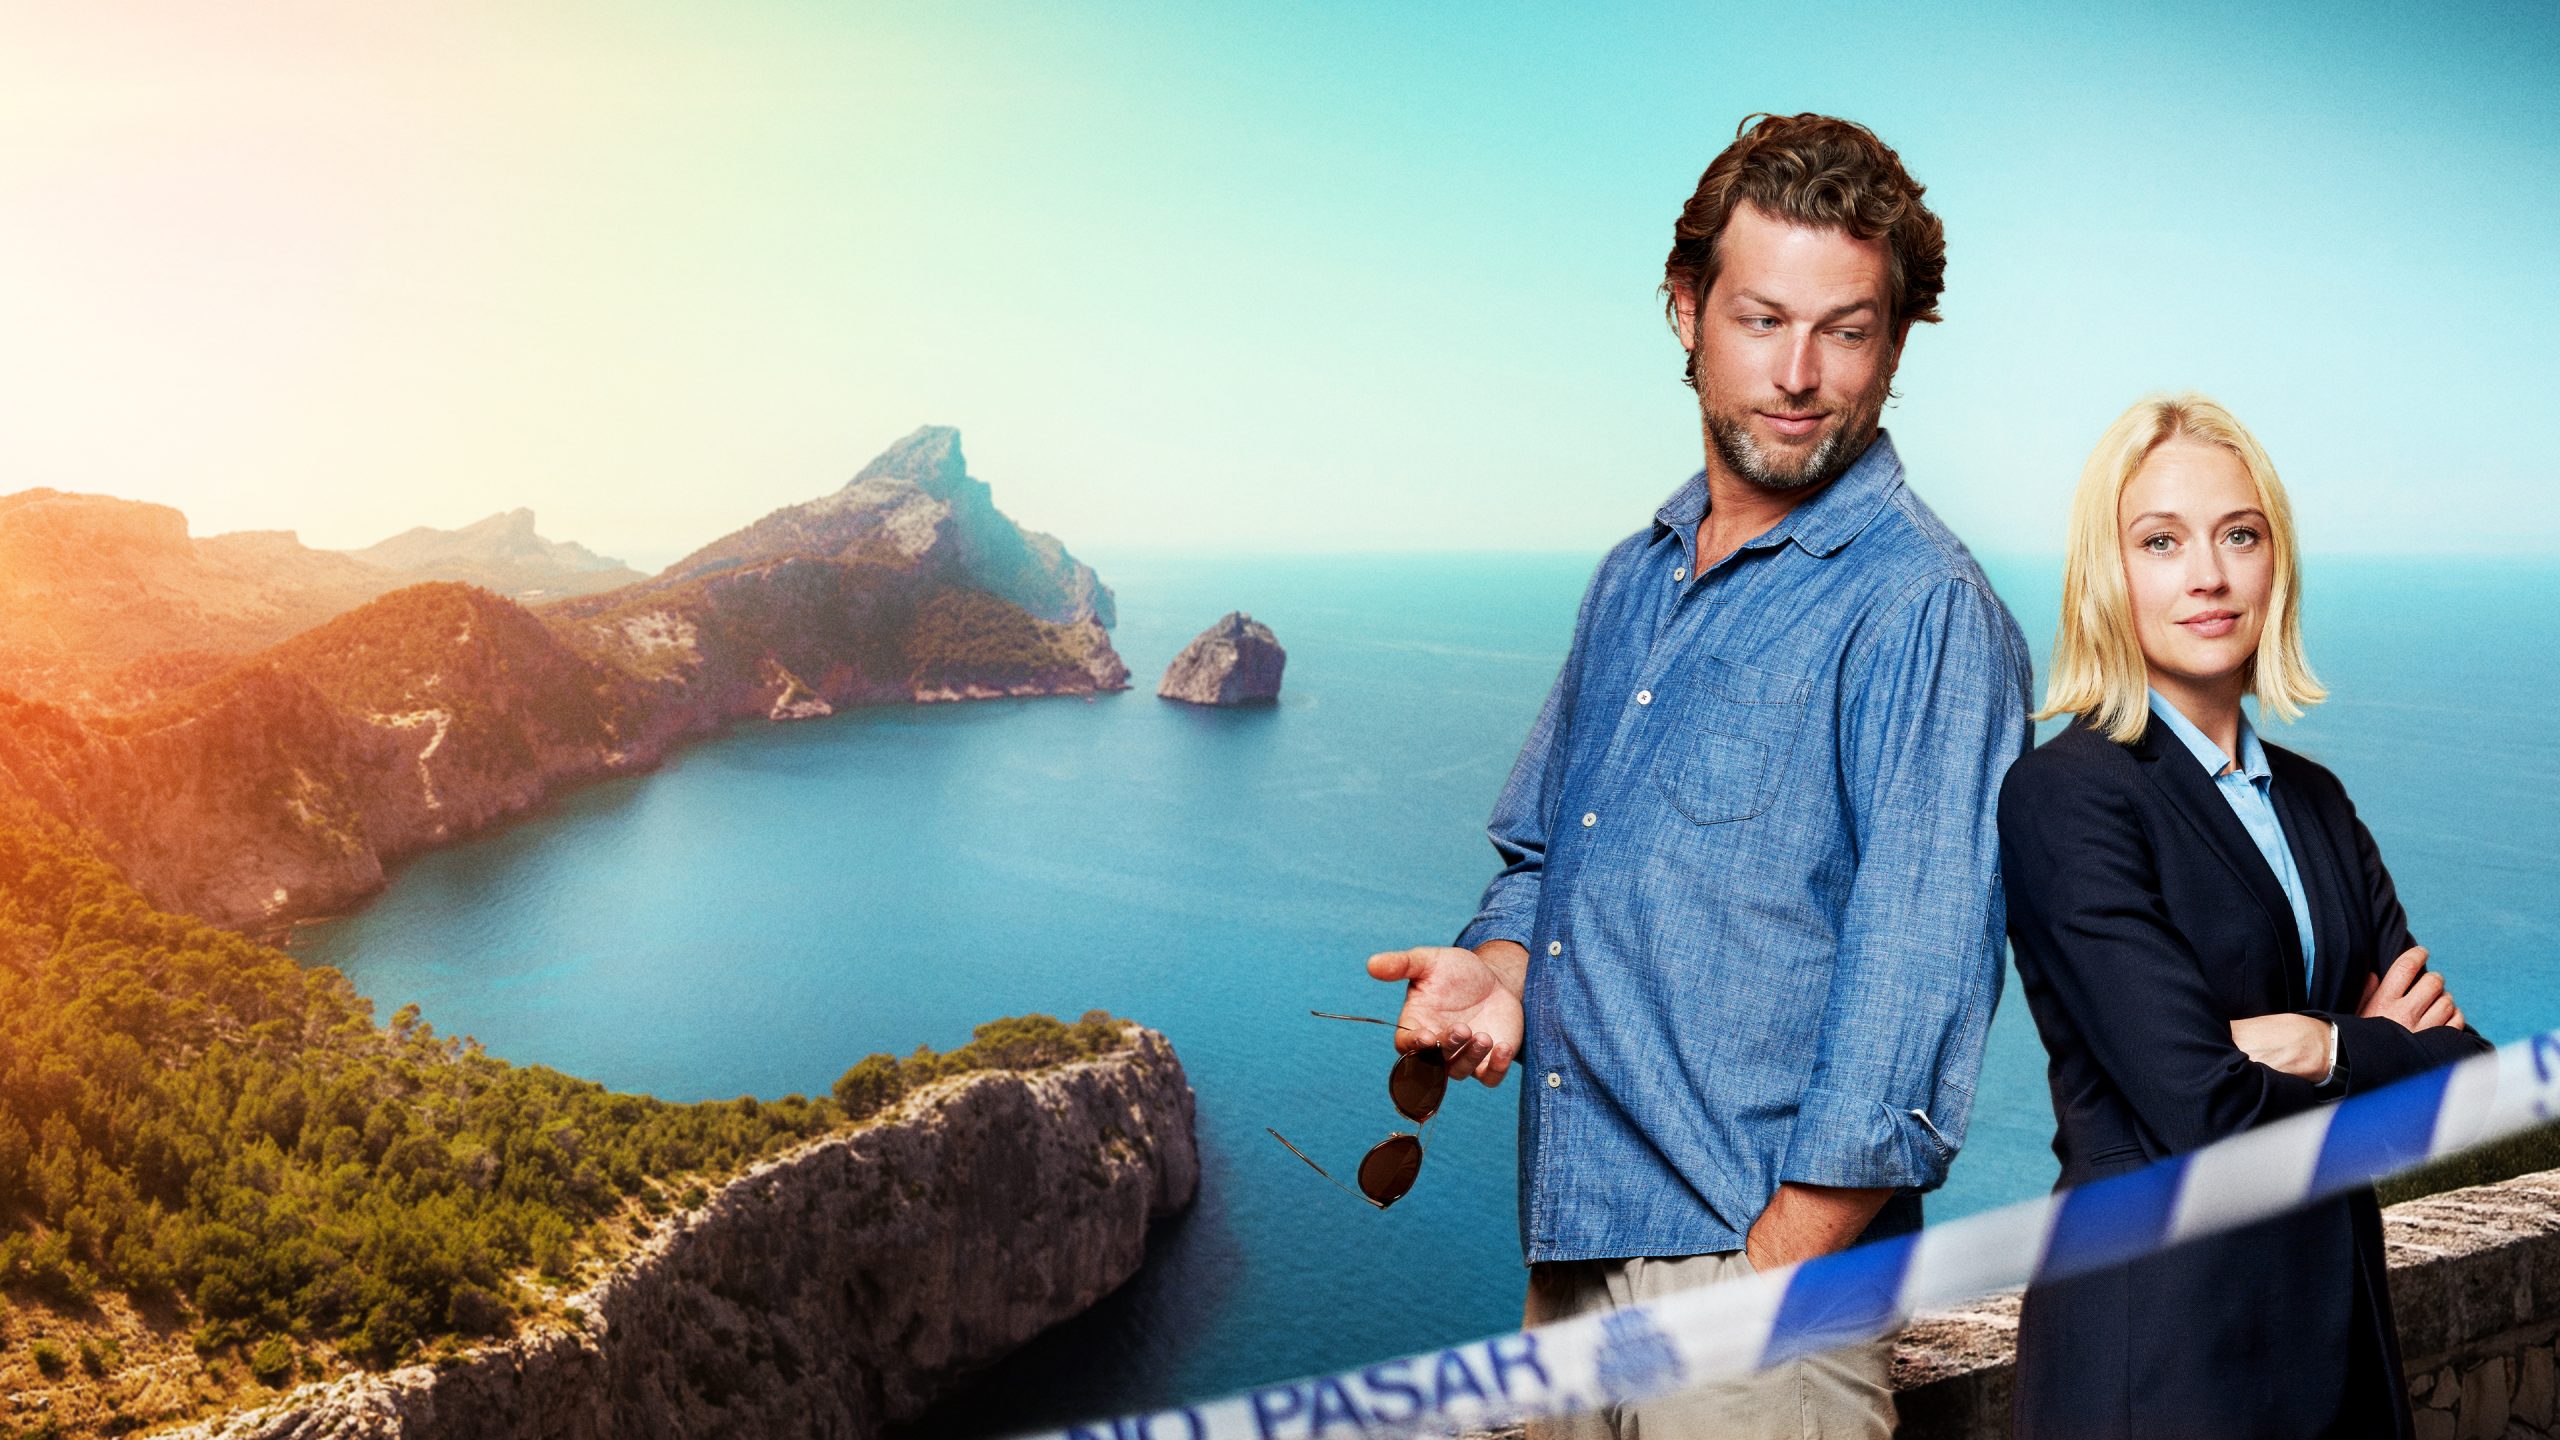 Popular BBC detective show The Mallorca Files starts shooting for third